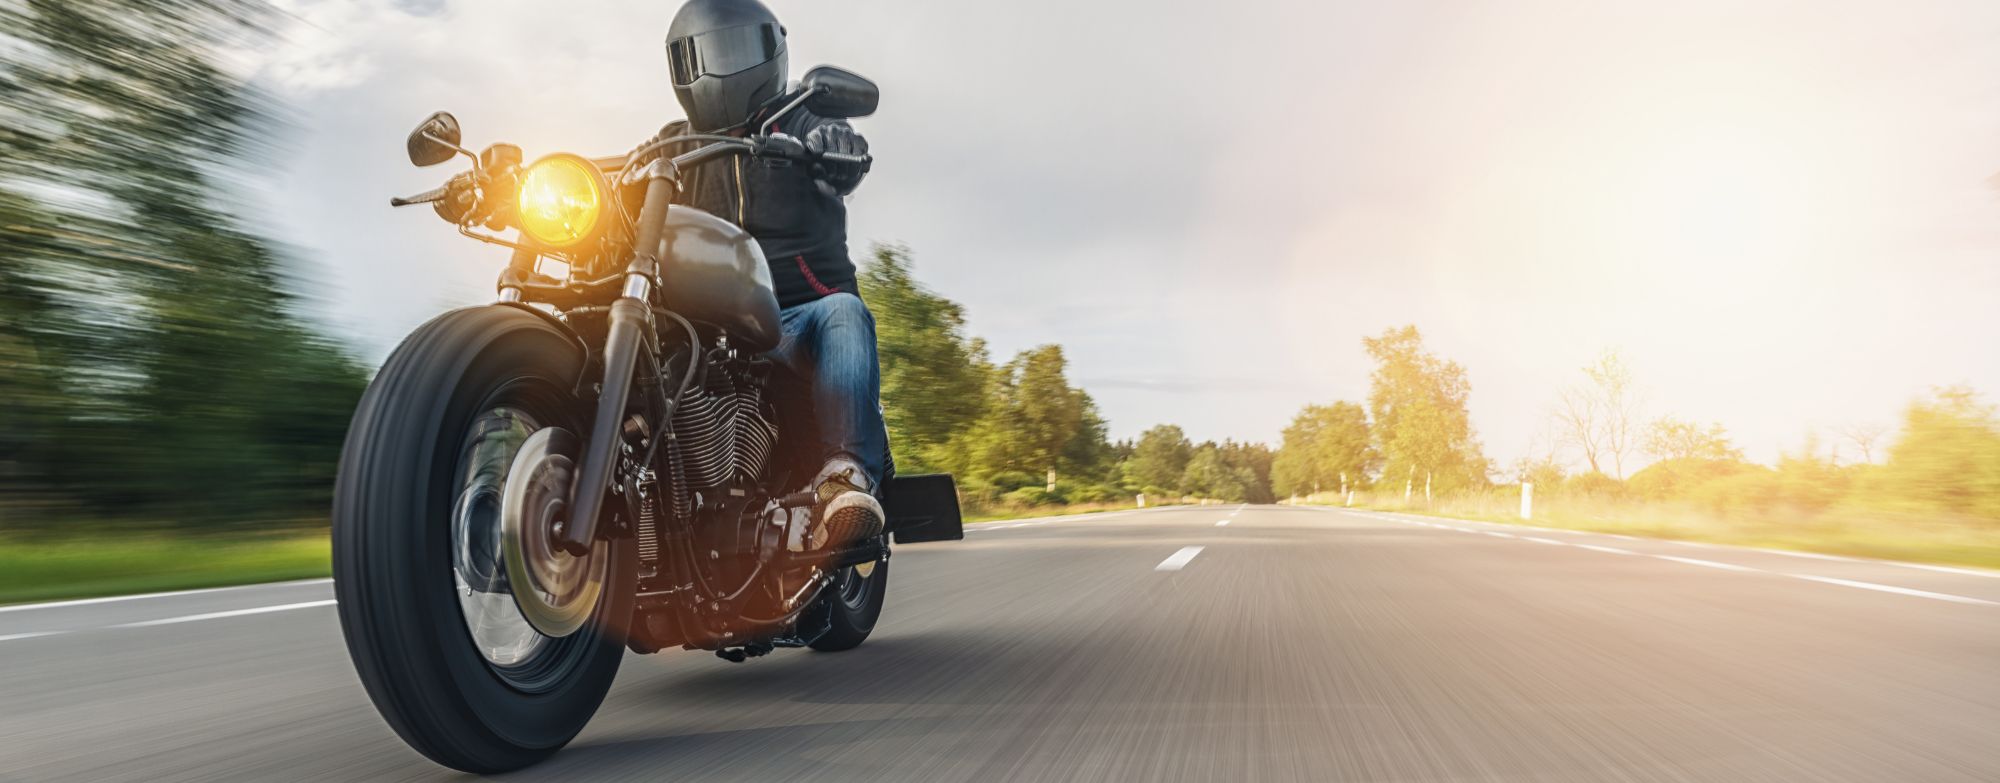 Syracuse Motorcycle Accident Attorneys